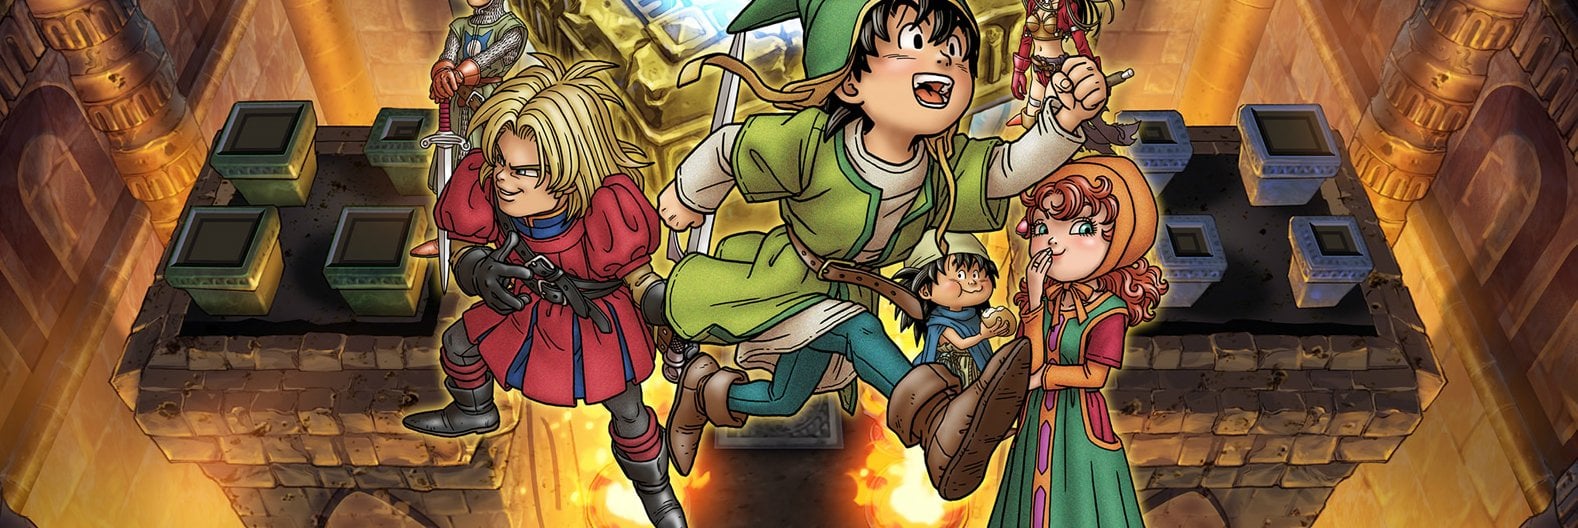 Review: Dragon Quest VII is for people who already love Dragon Quest